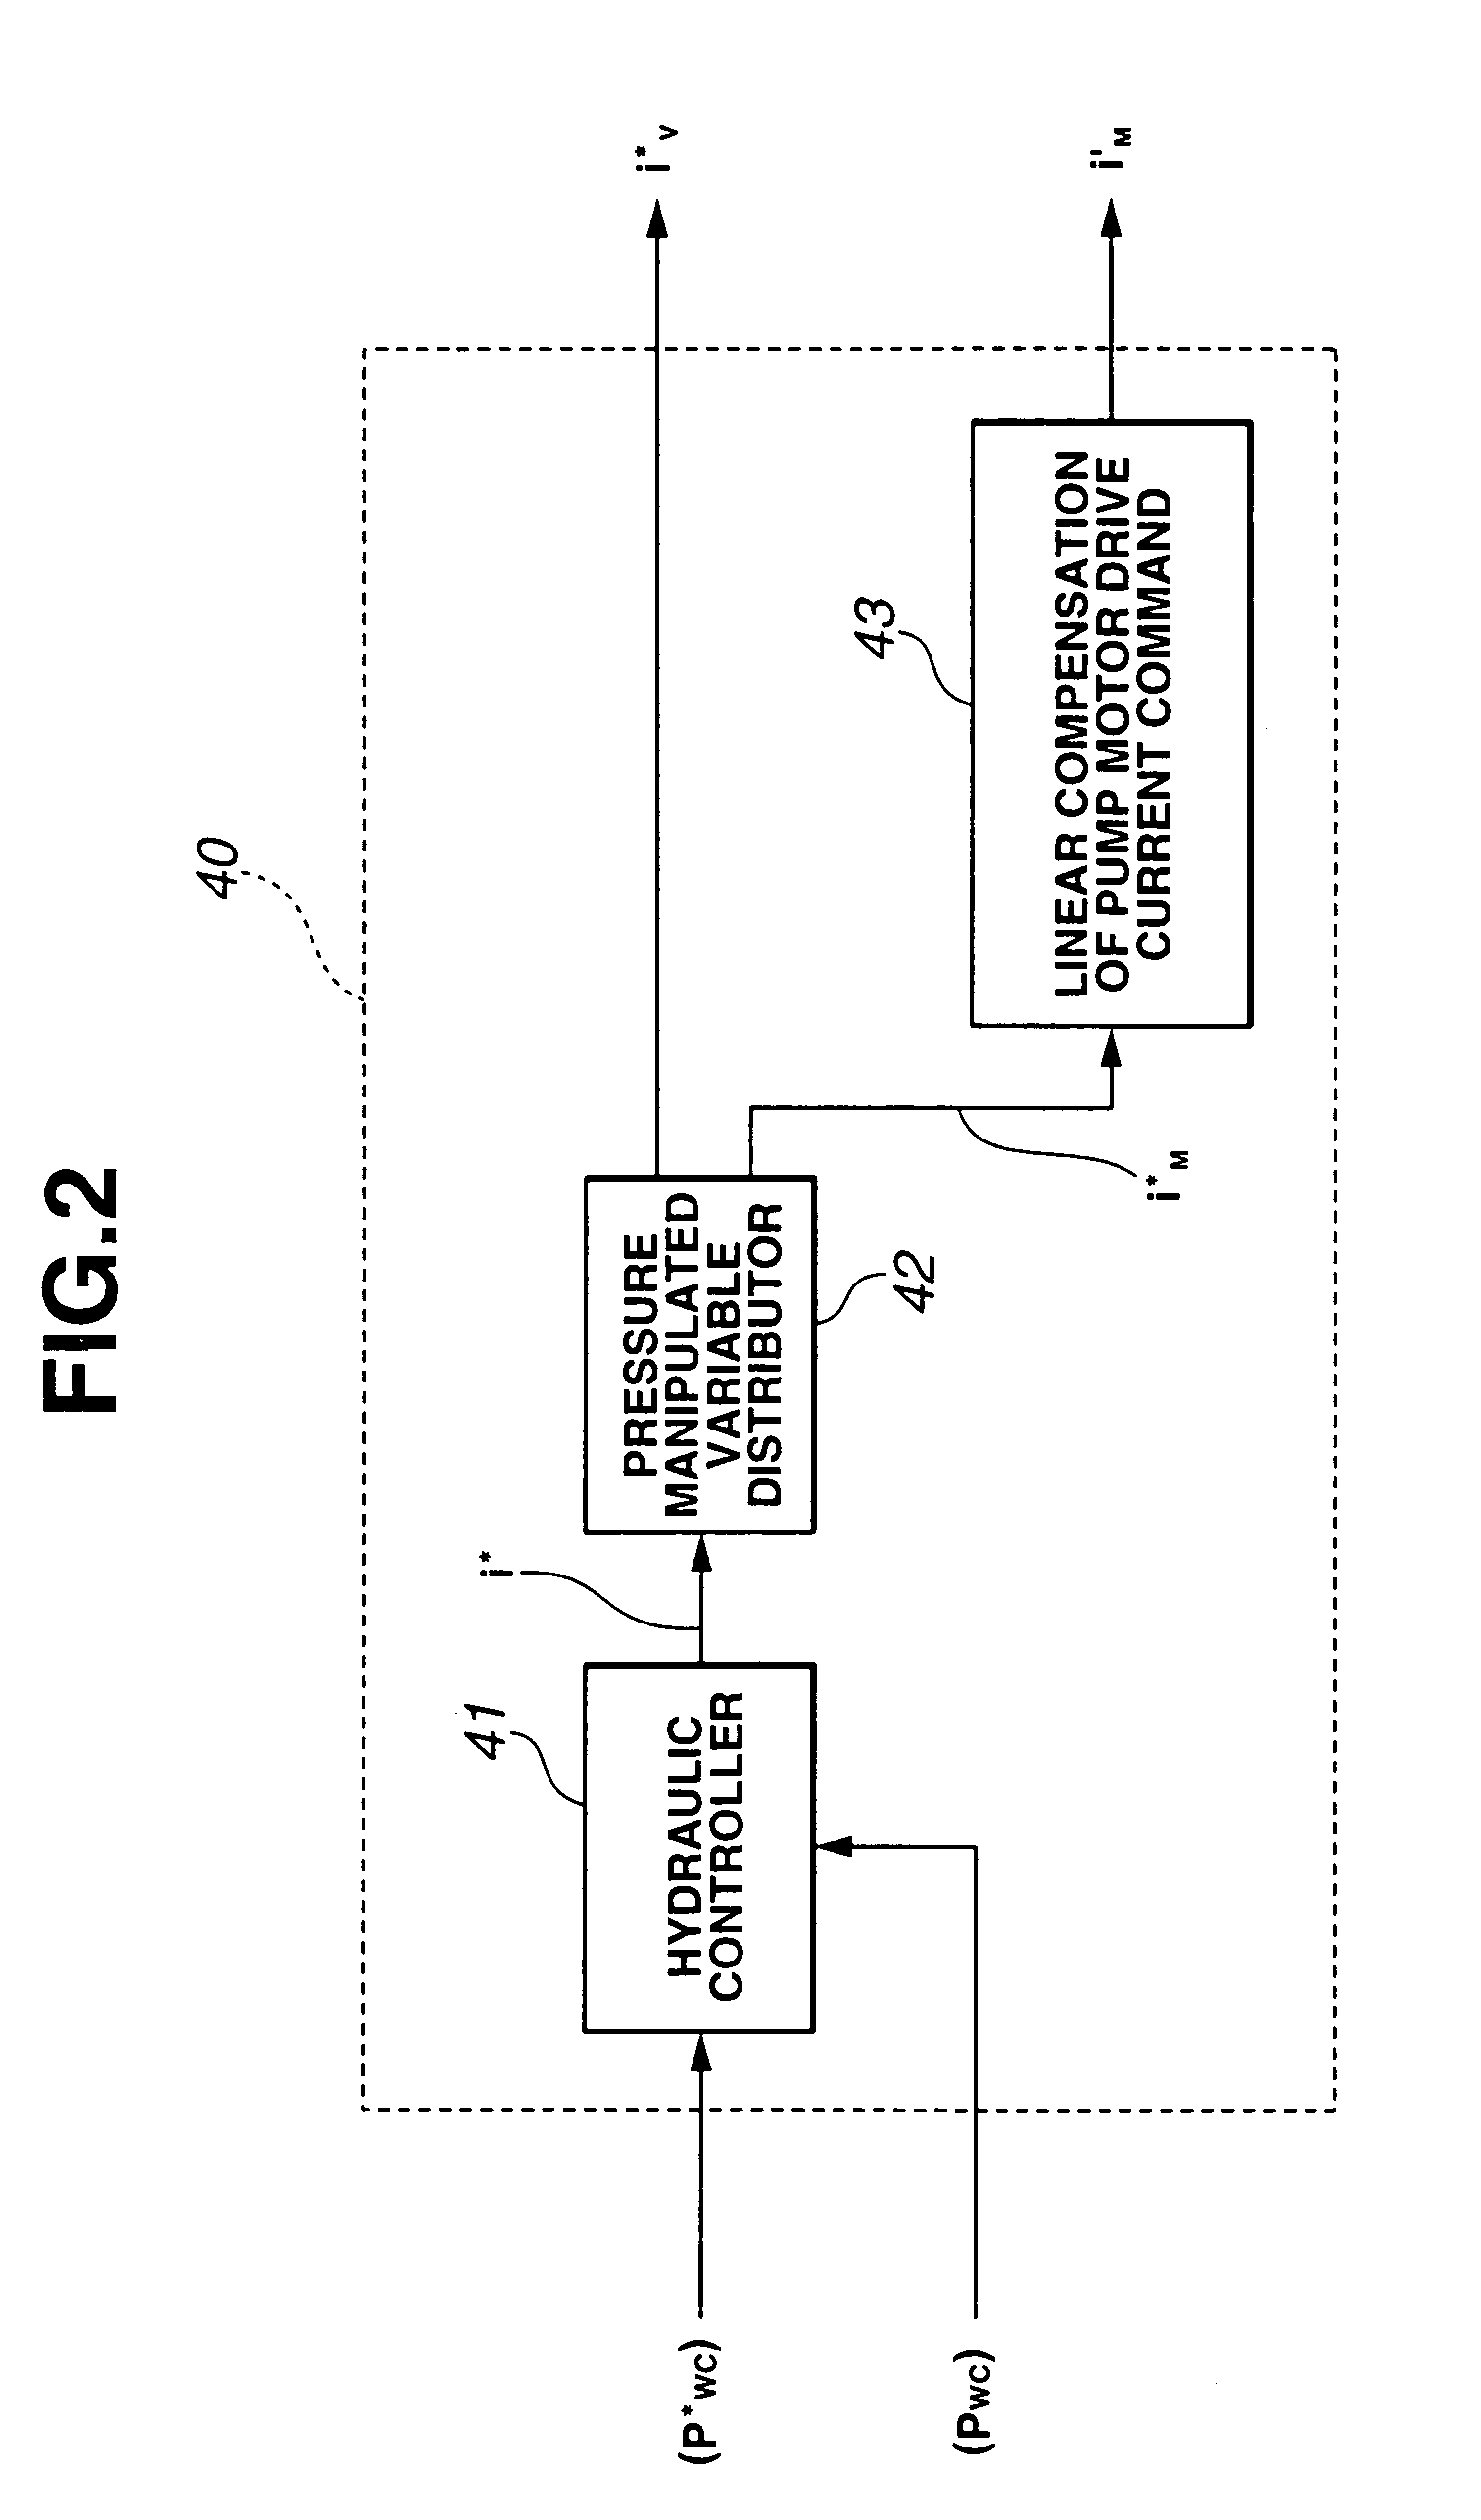 Electronically controlled hydraulic brake system